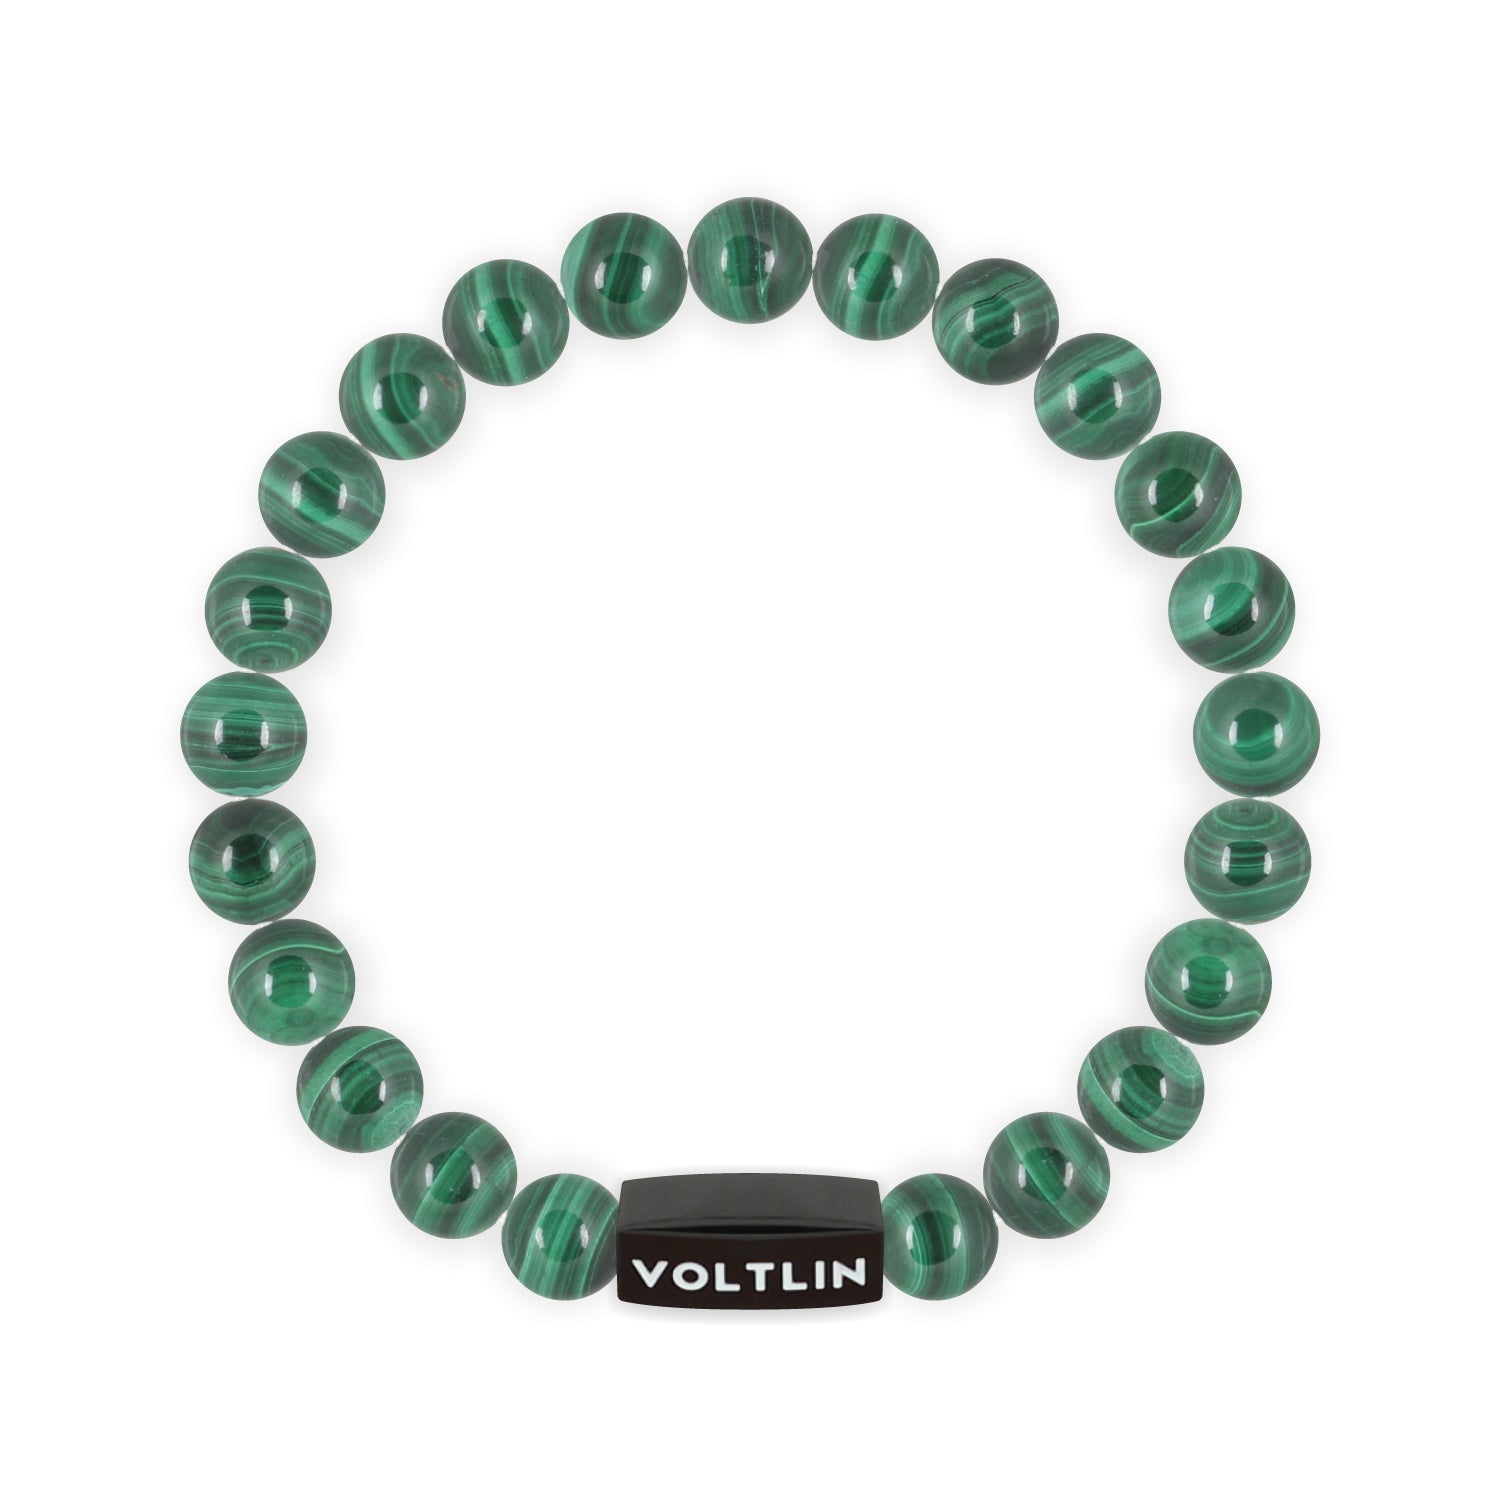 Front view of an 8mm Malachite crystal beaded stretch bracelet with black stainless steel logo bead made by Voltlin